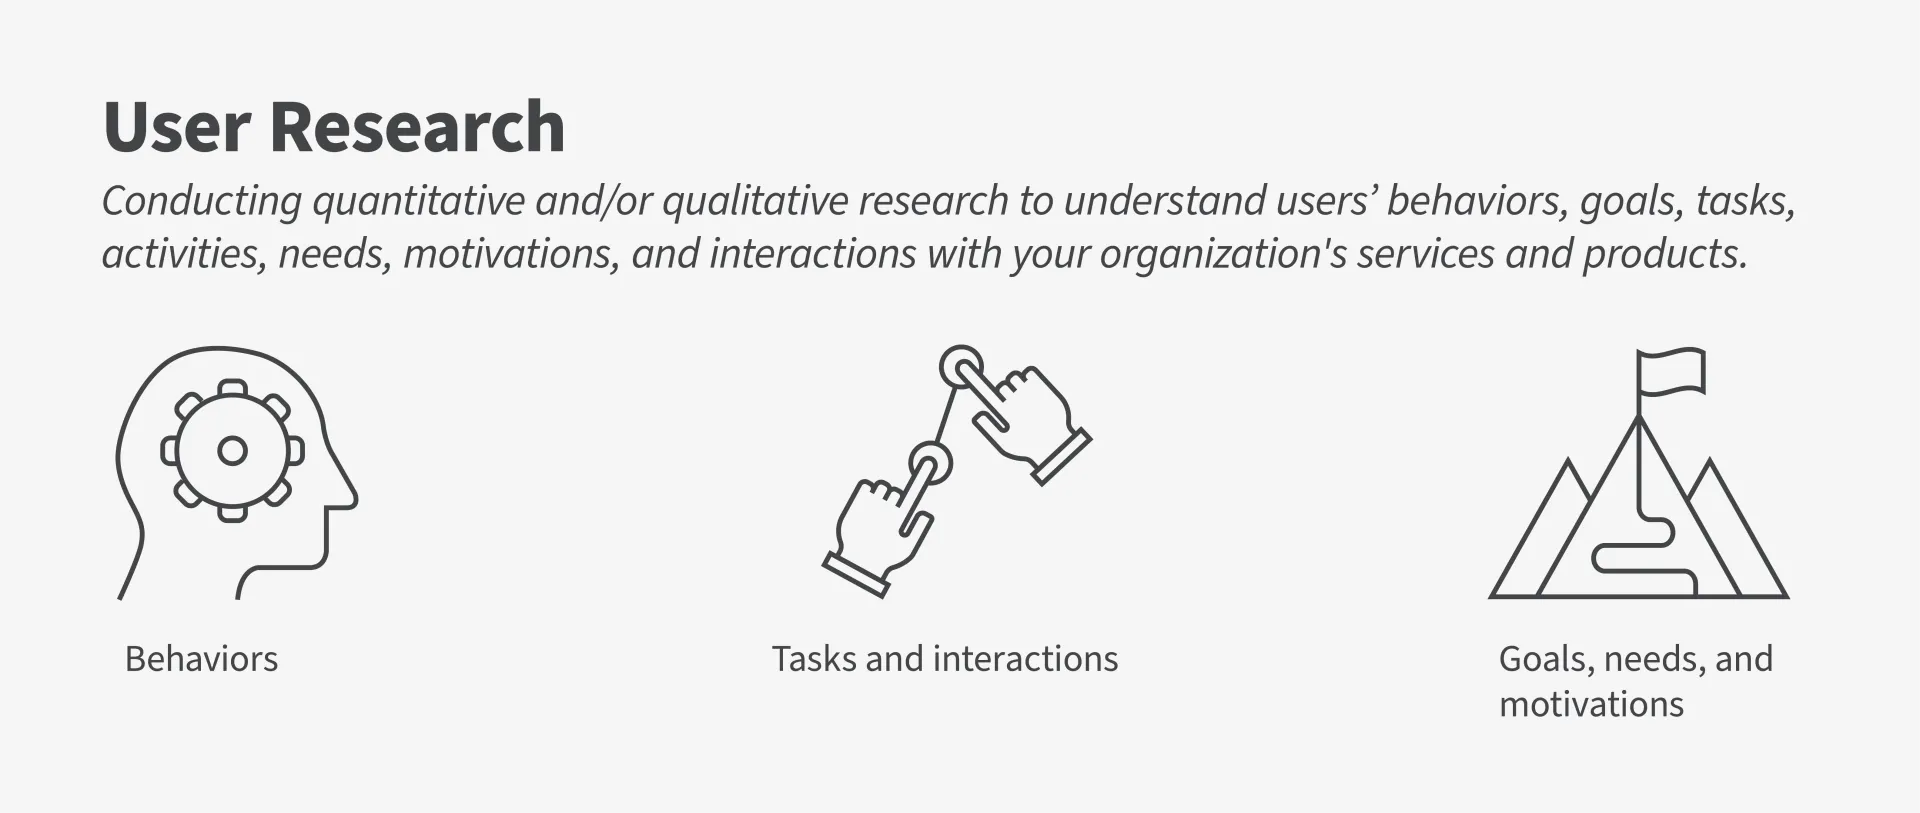 Infographic about user research and understanding a user's behaviors, tasks and interactions, and goals, needs, and motivations represented by three icons.